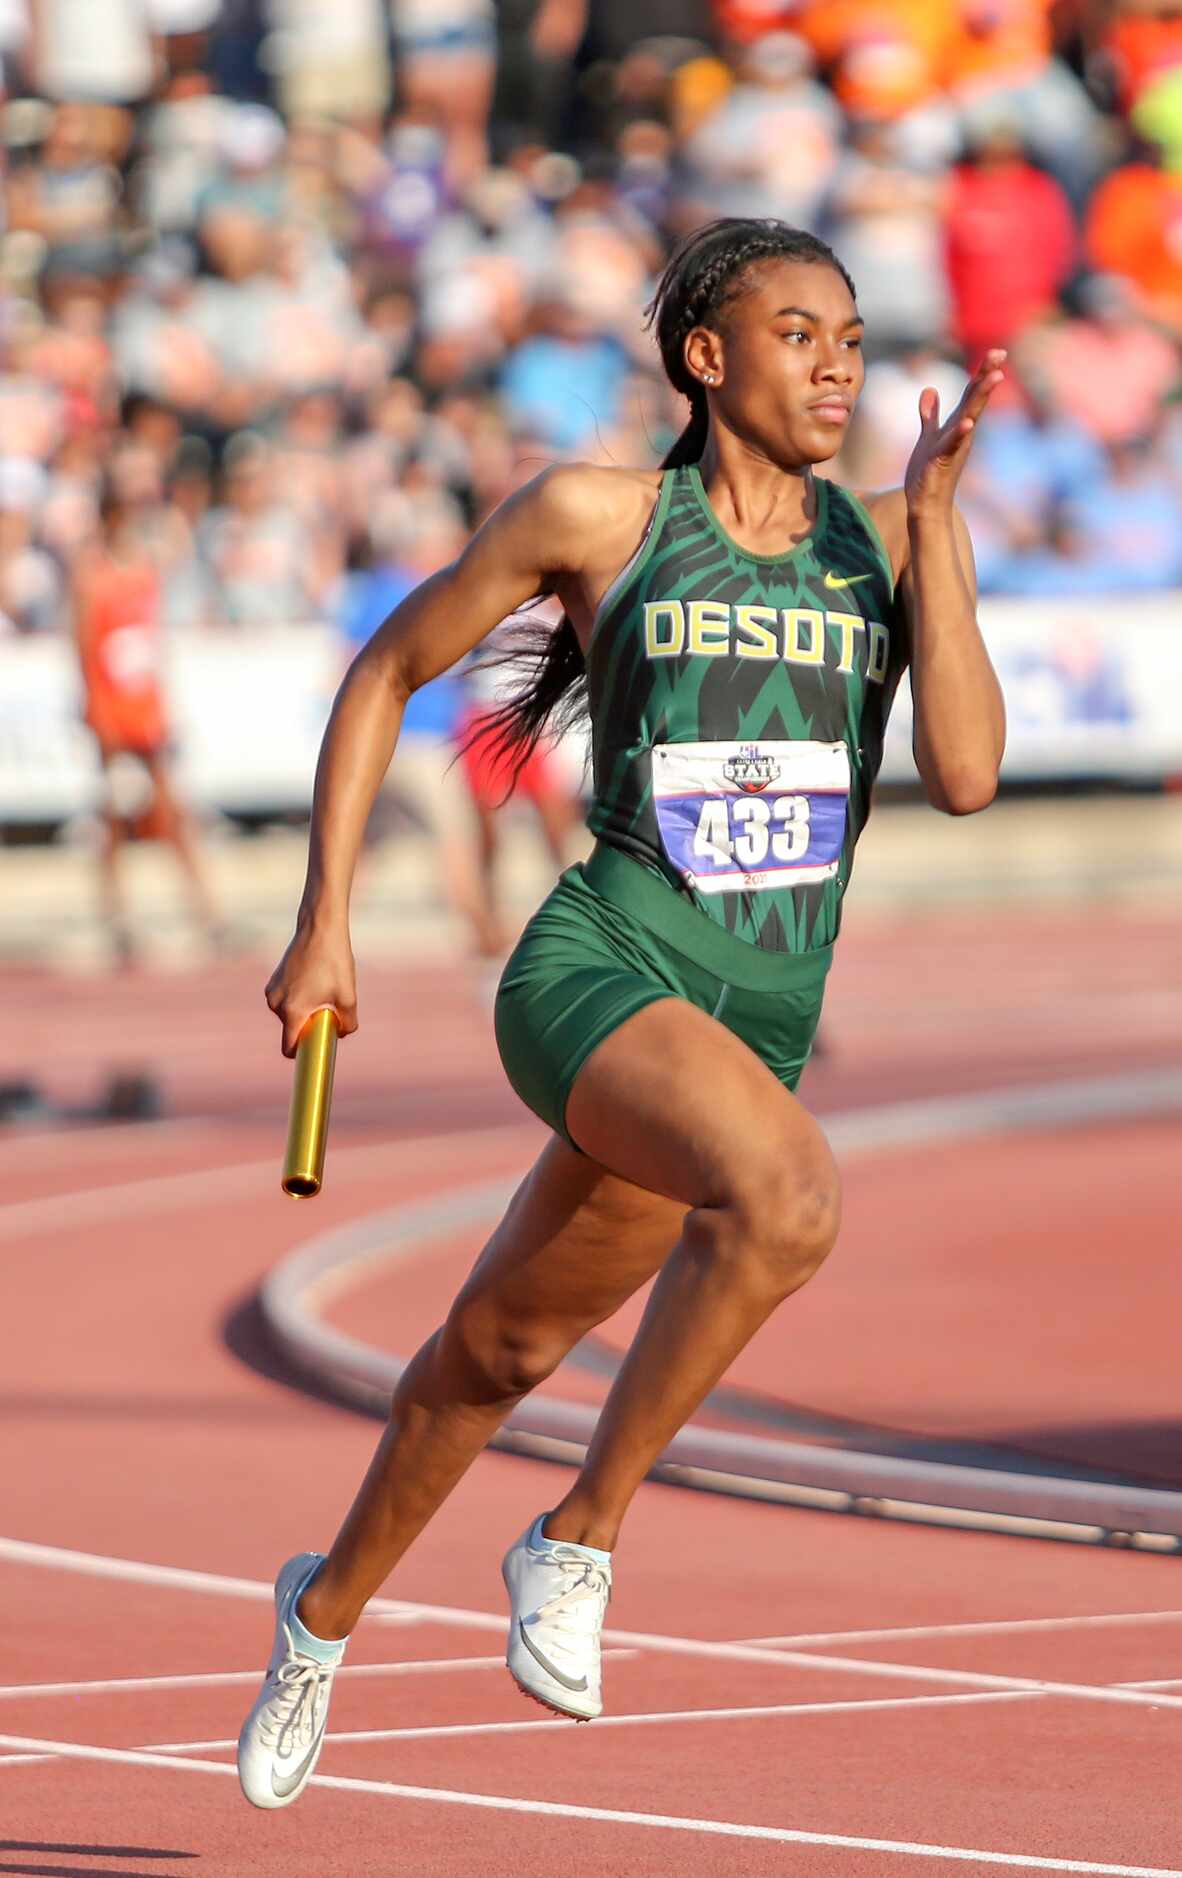 Amelliah Birdow of DeSoto competes in the 6A Girls 4x200 meter relay during the UIL state...